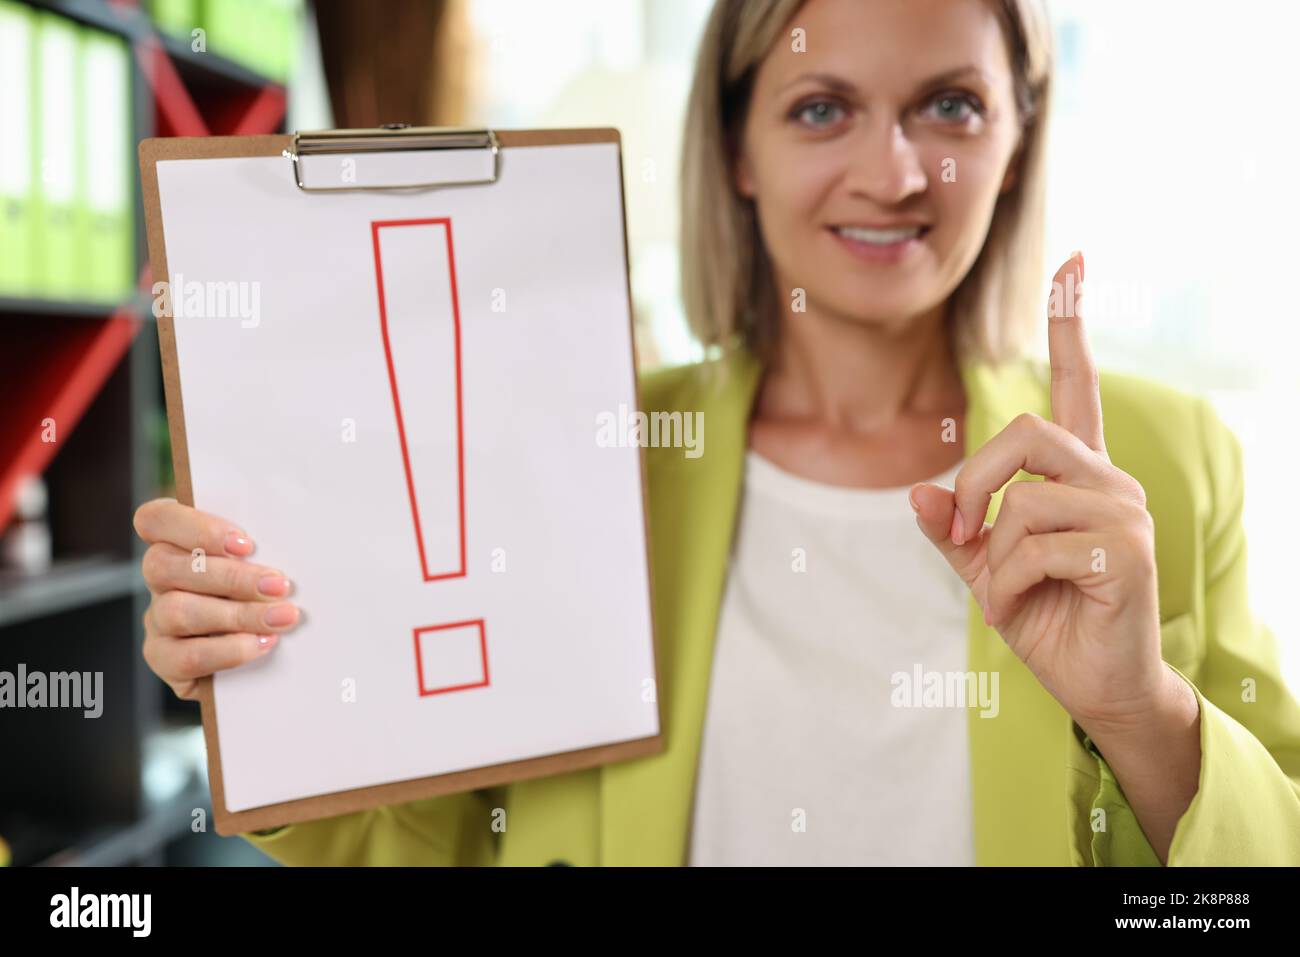 Woman holding clipboard with red exclamation point Stock Photo